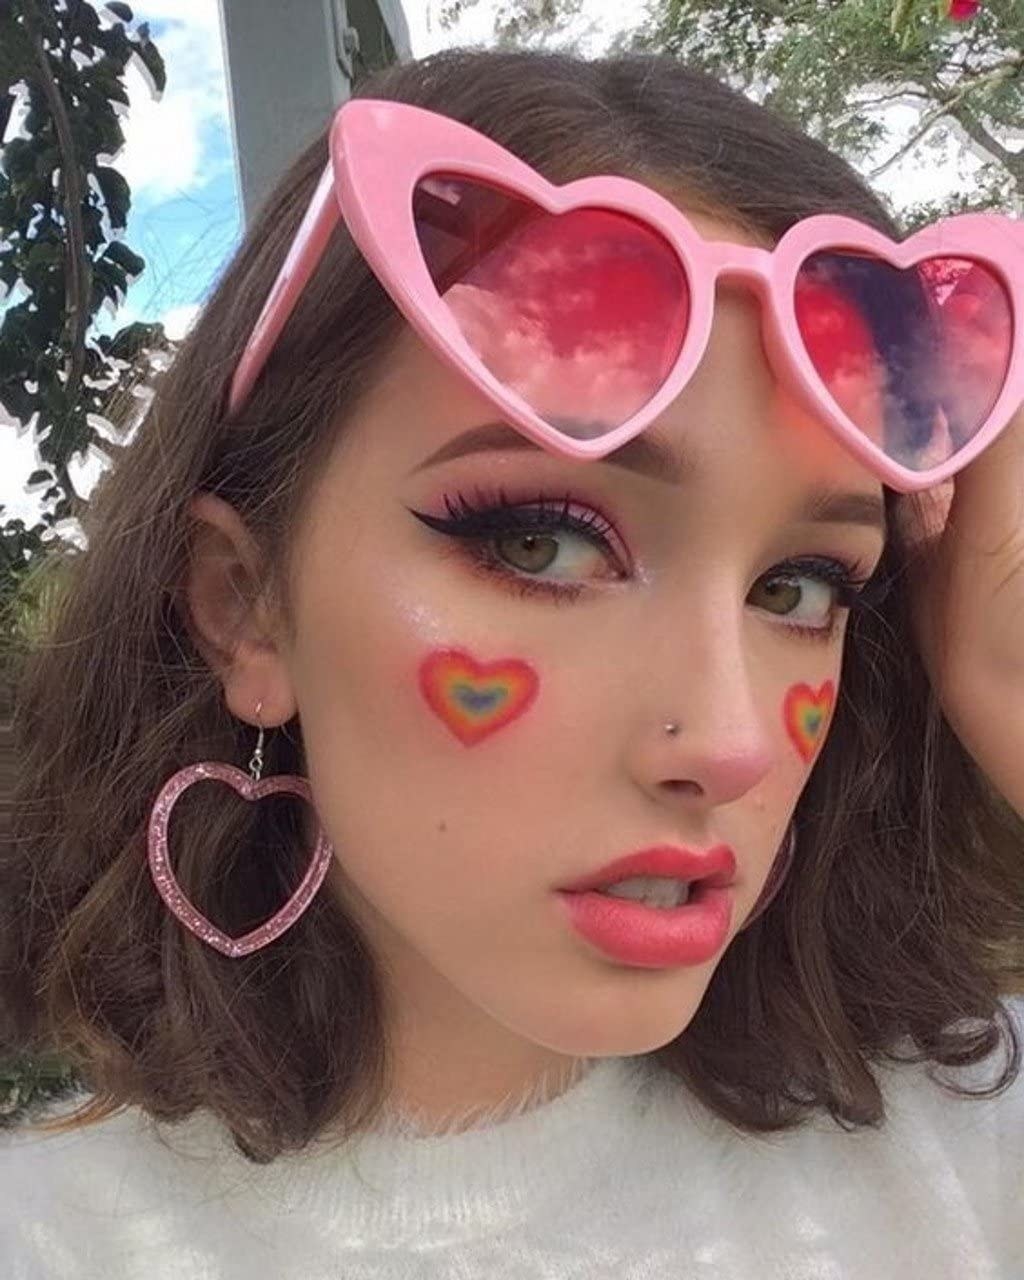 A person wearing the sunnies with rainbow hearts painted on their face